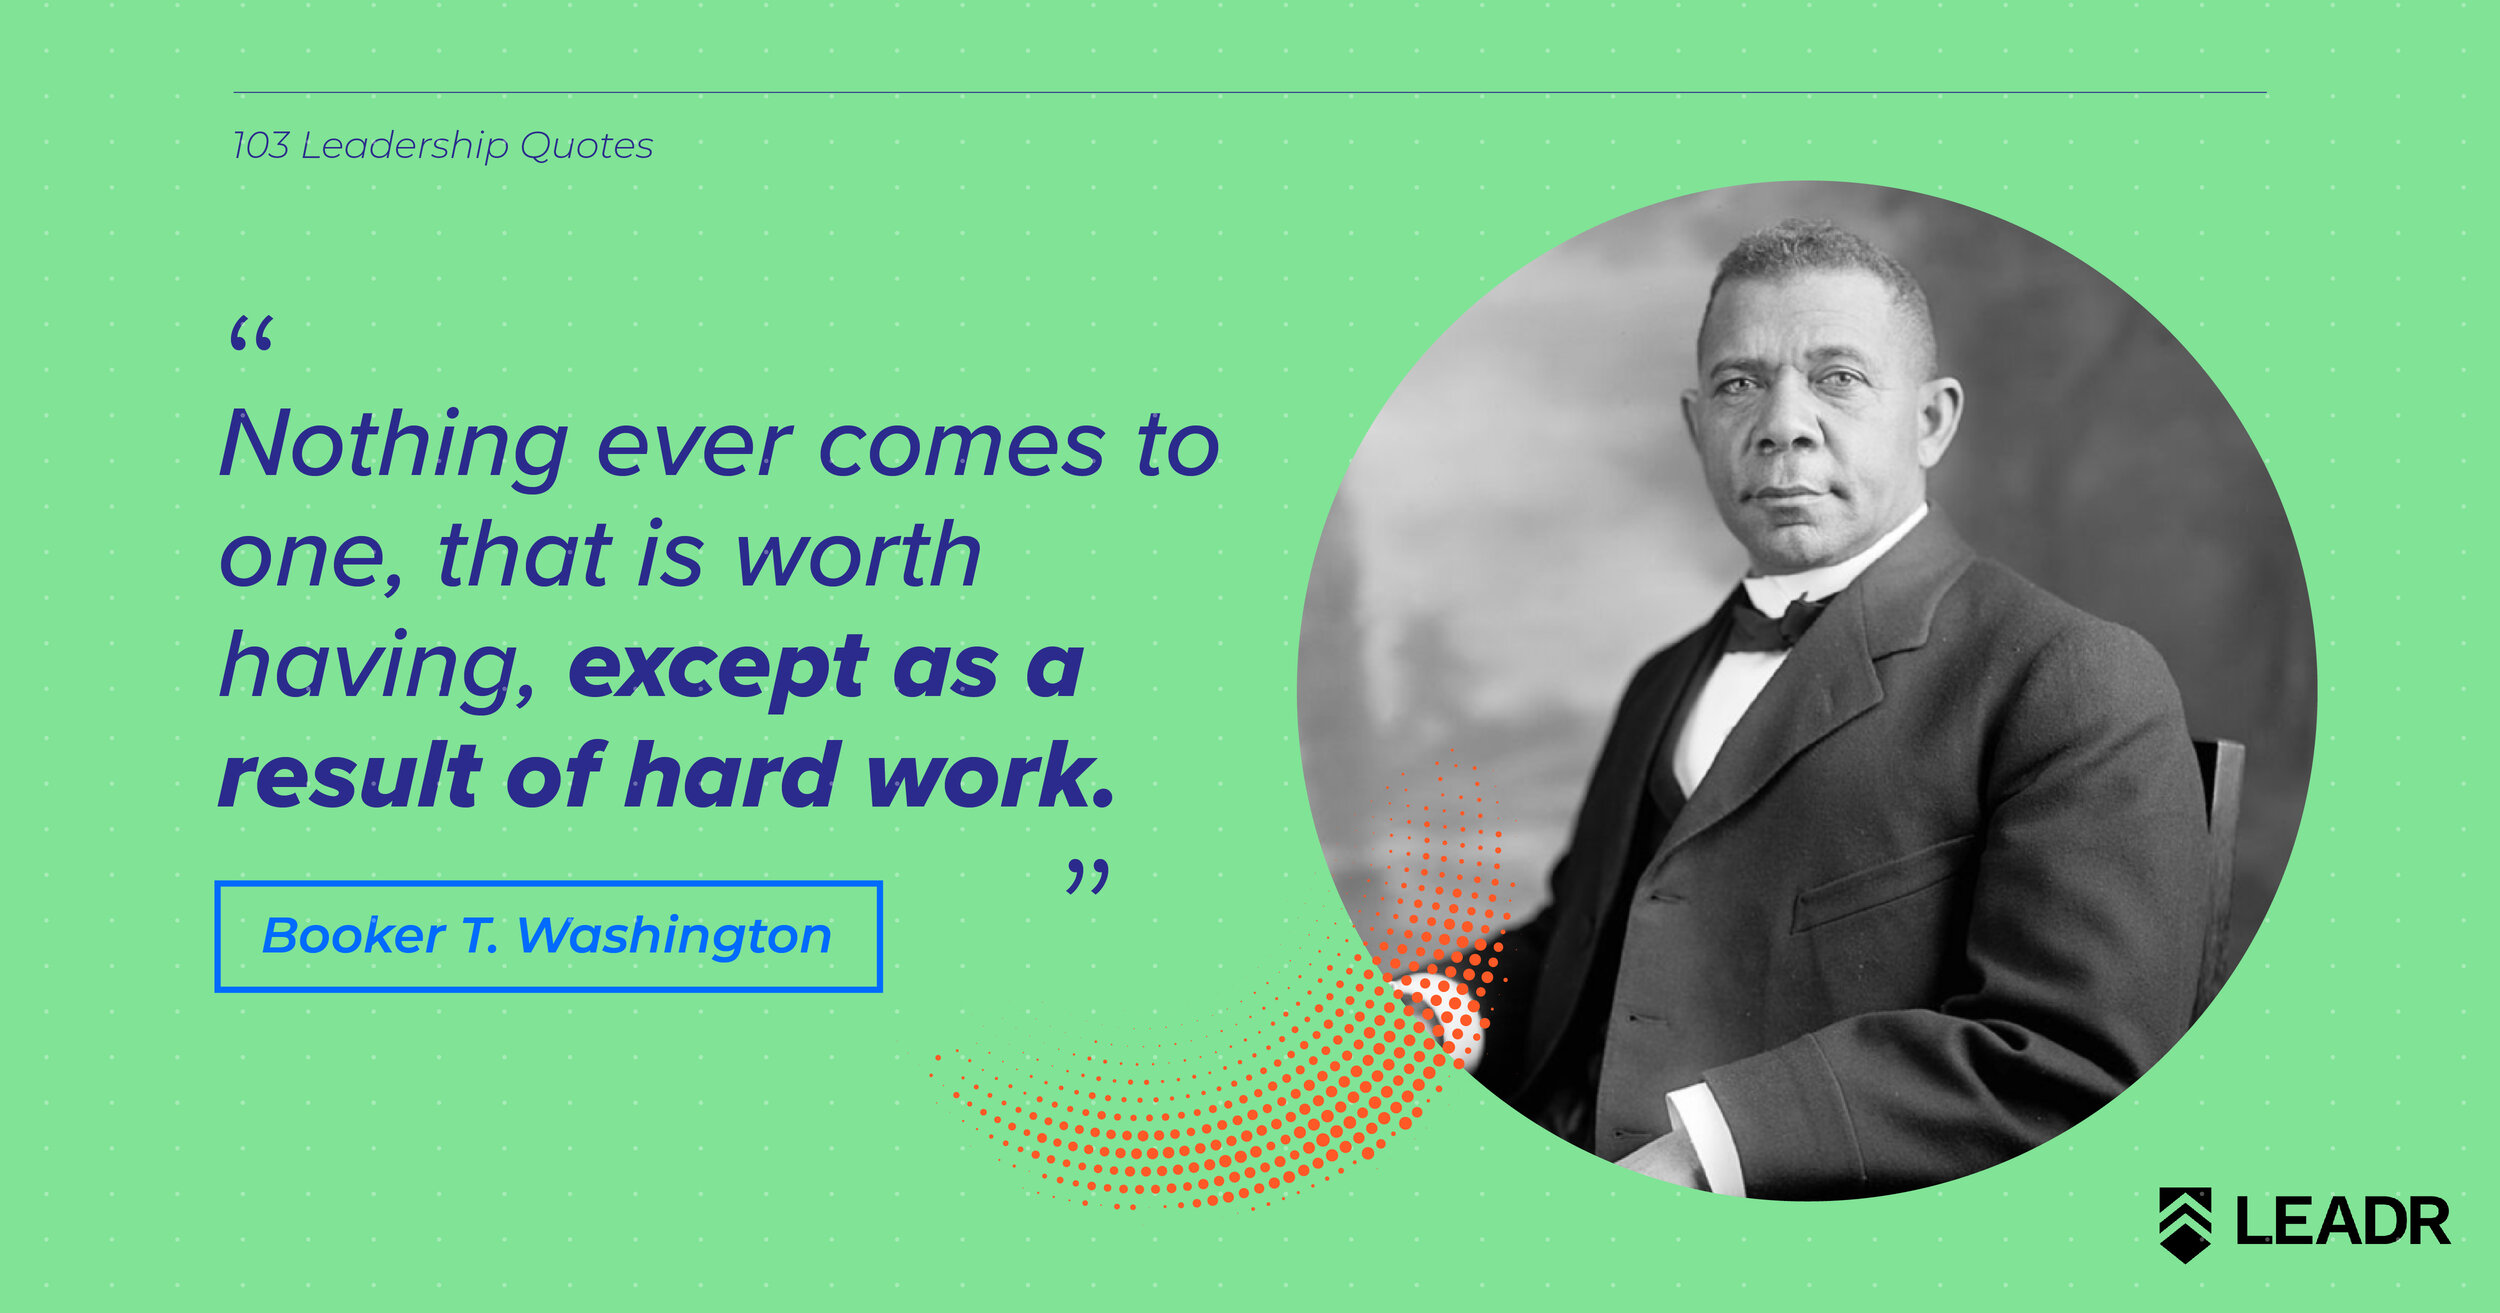 Royalty free downloadable leadership quotes - Booker T. Washington